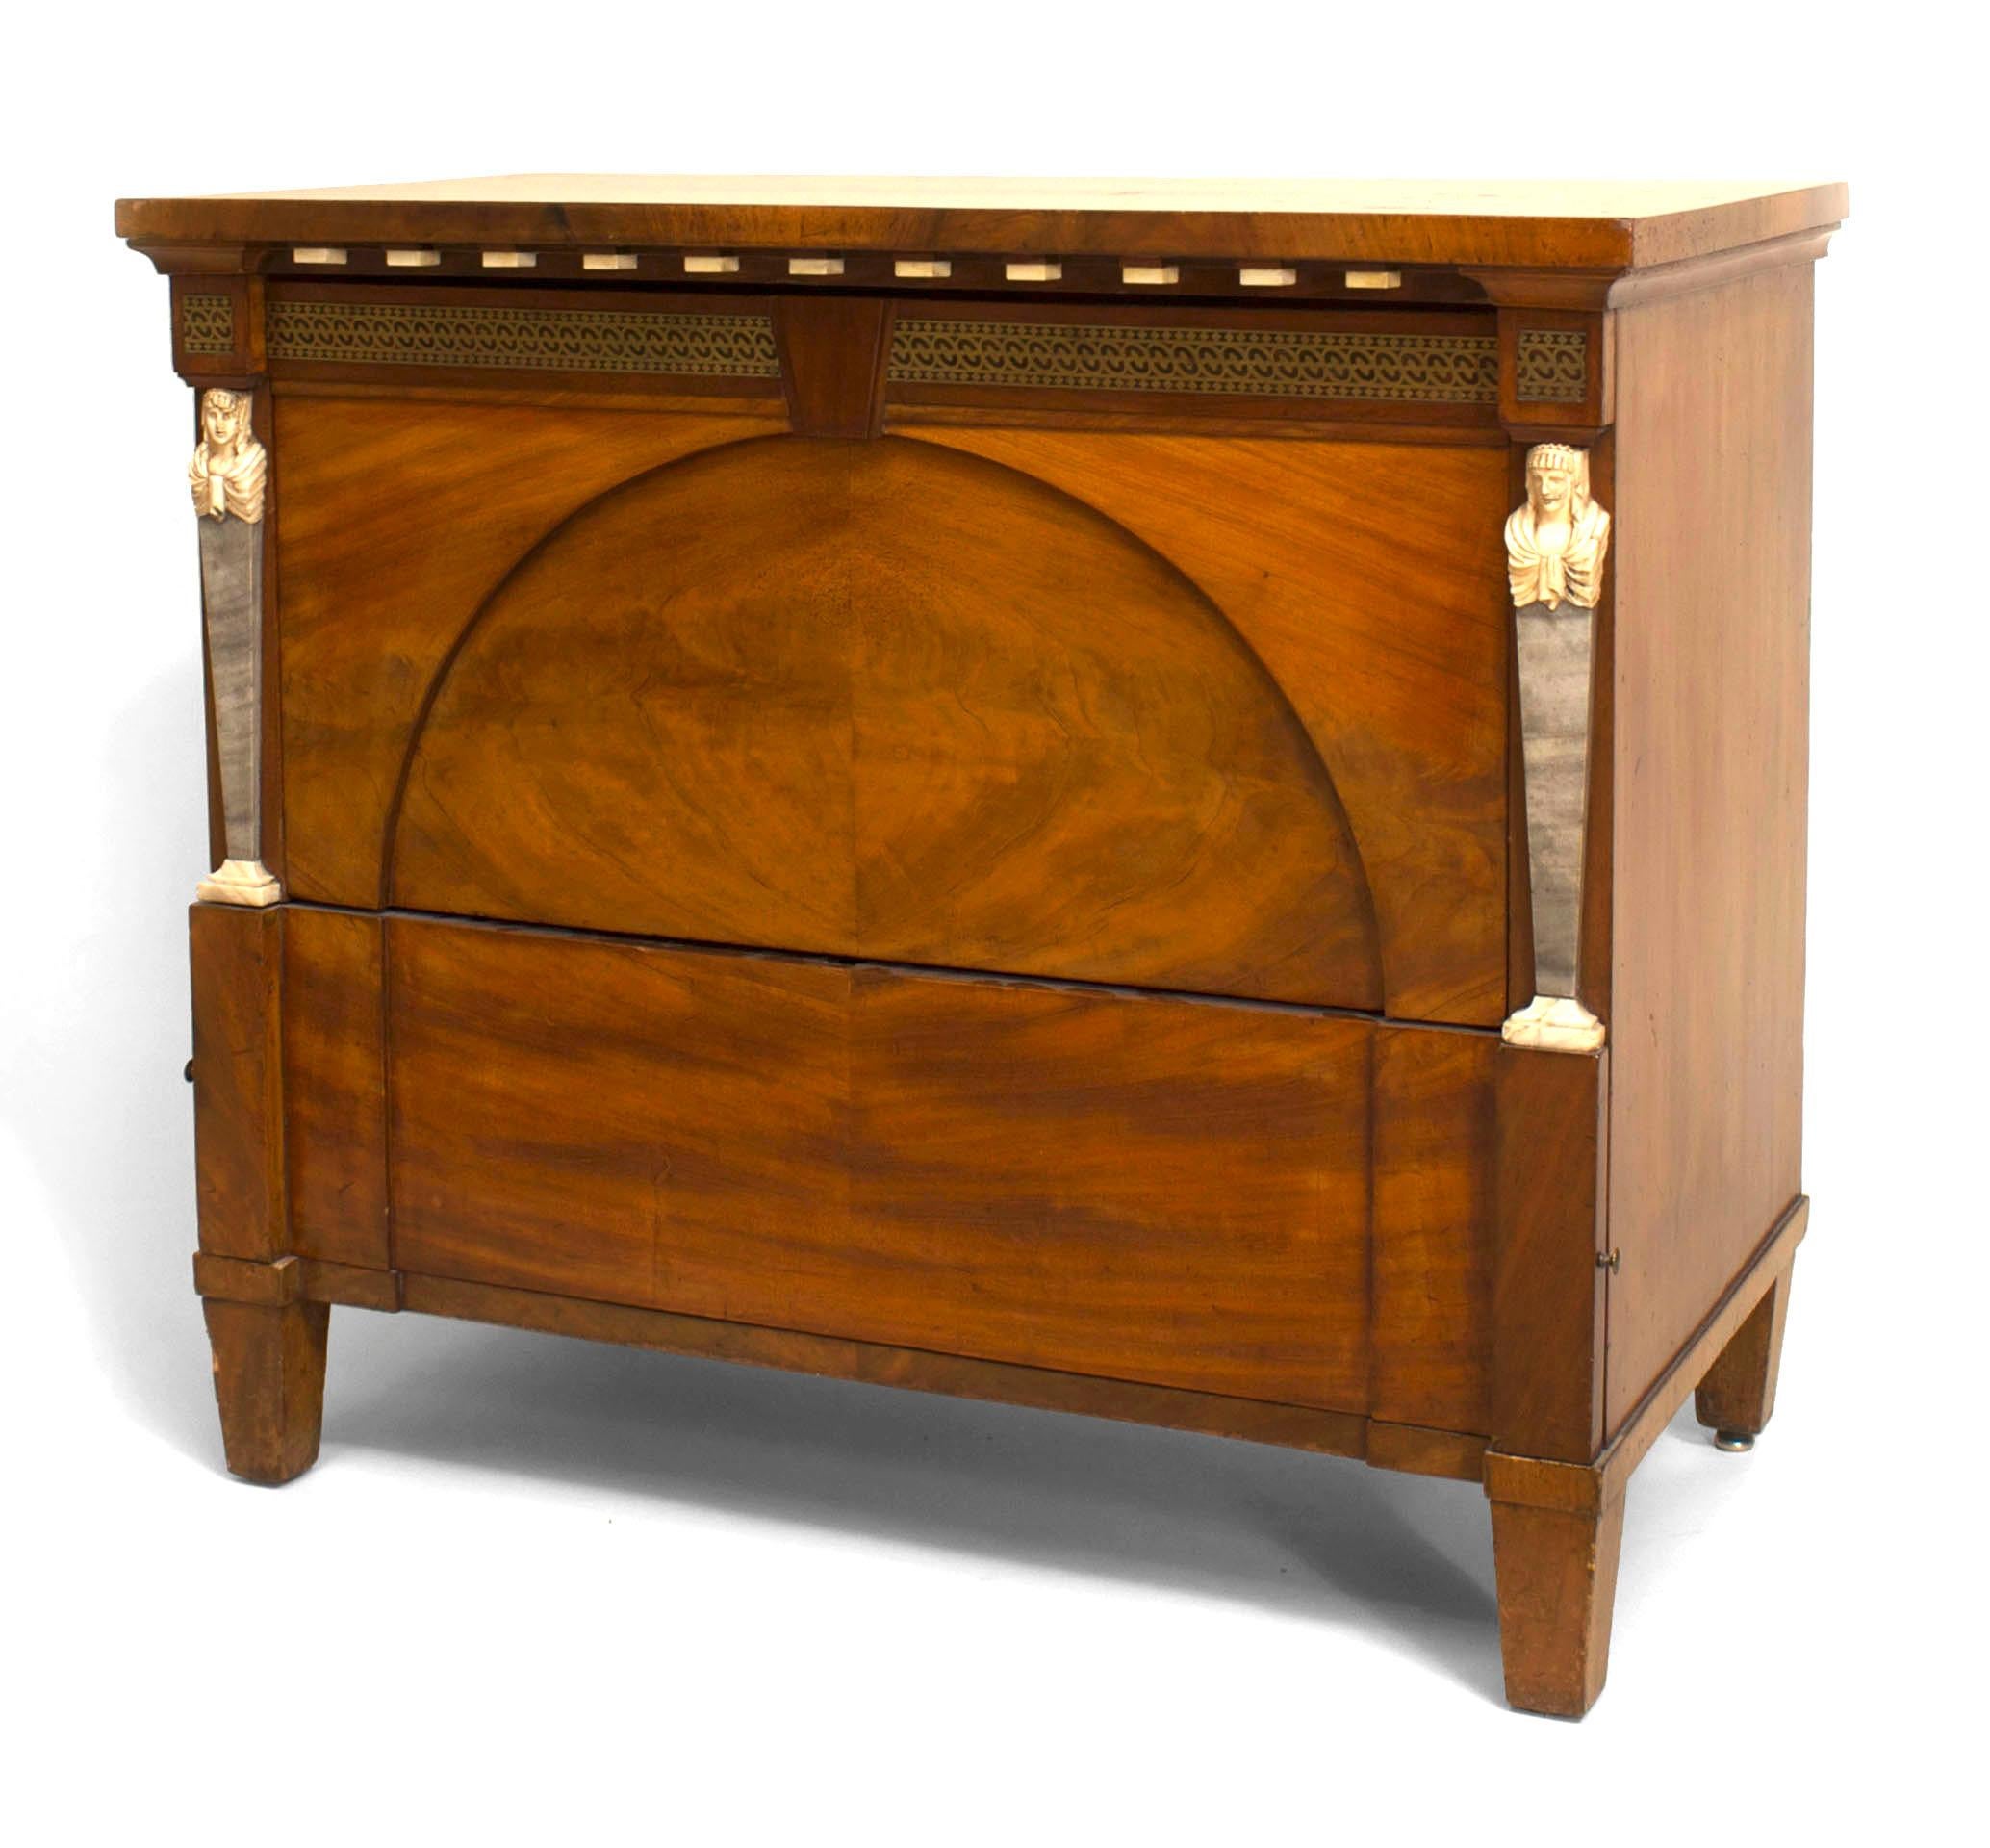 Nineteenth century Russian mahogany two drawer commode featuring Neoclassical design elements. Its front, in particular, resembles an architectural facade, with its frieze-like bone and brass- trimmed apron and arcaded inset center flanked by